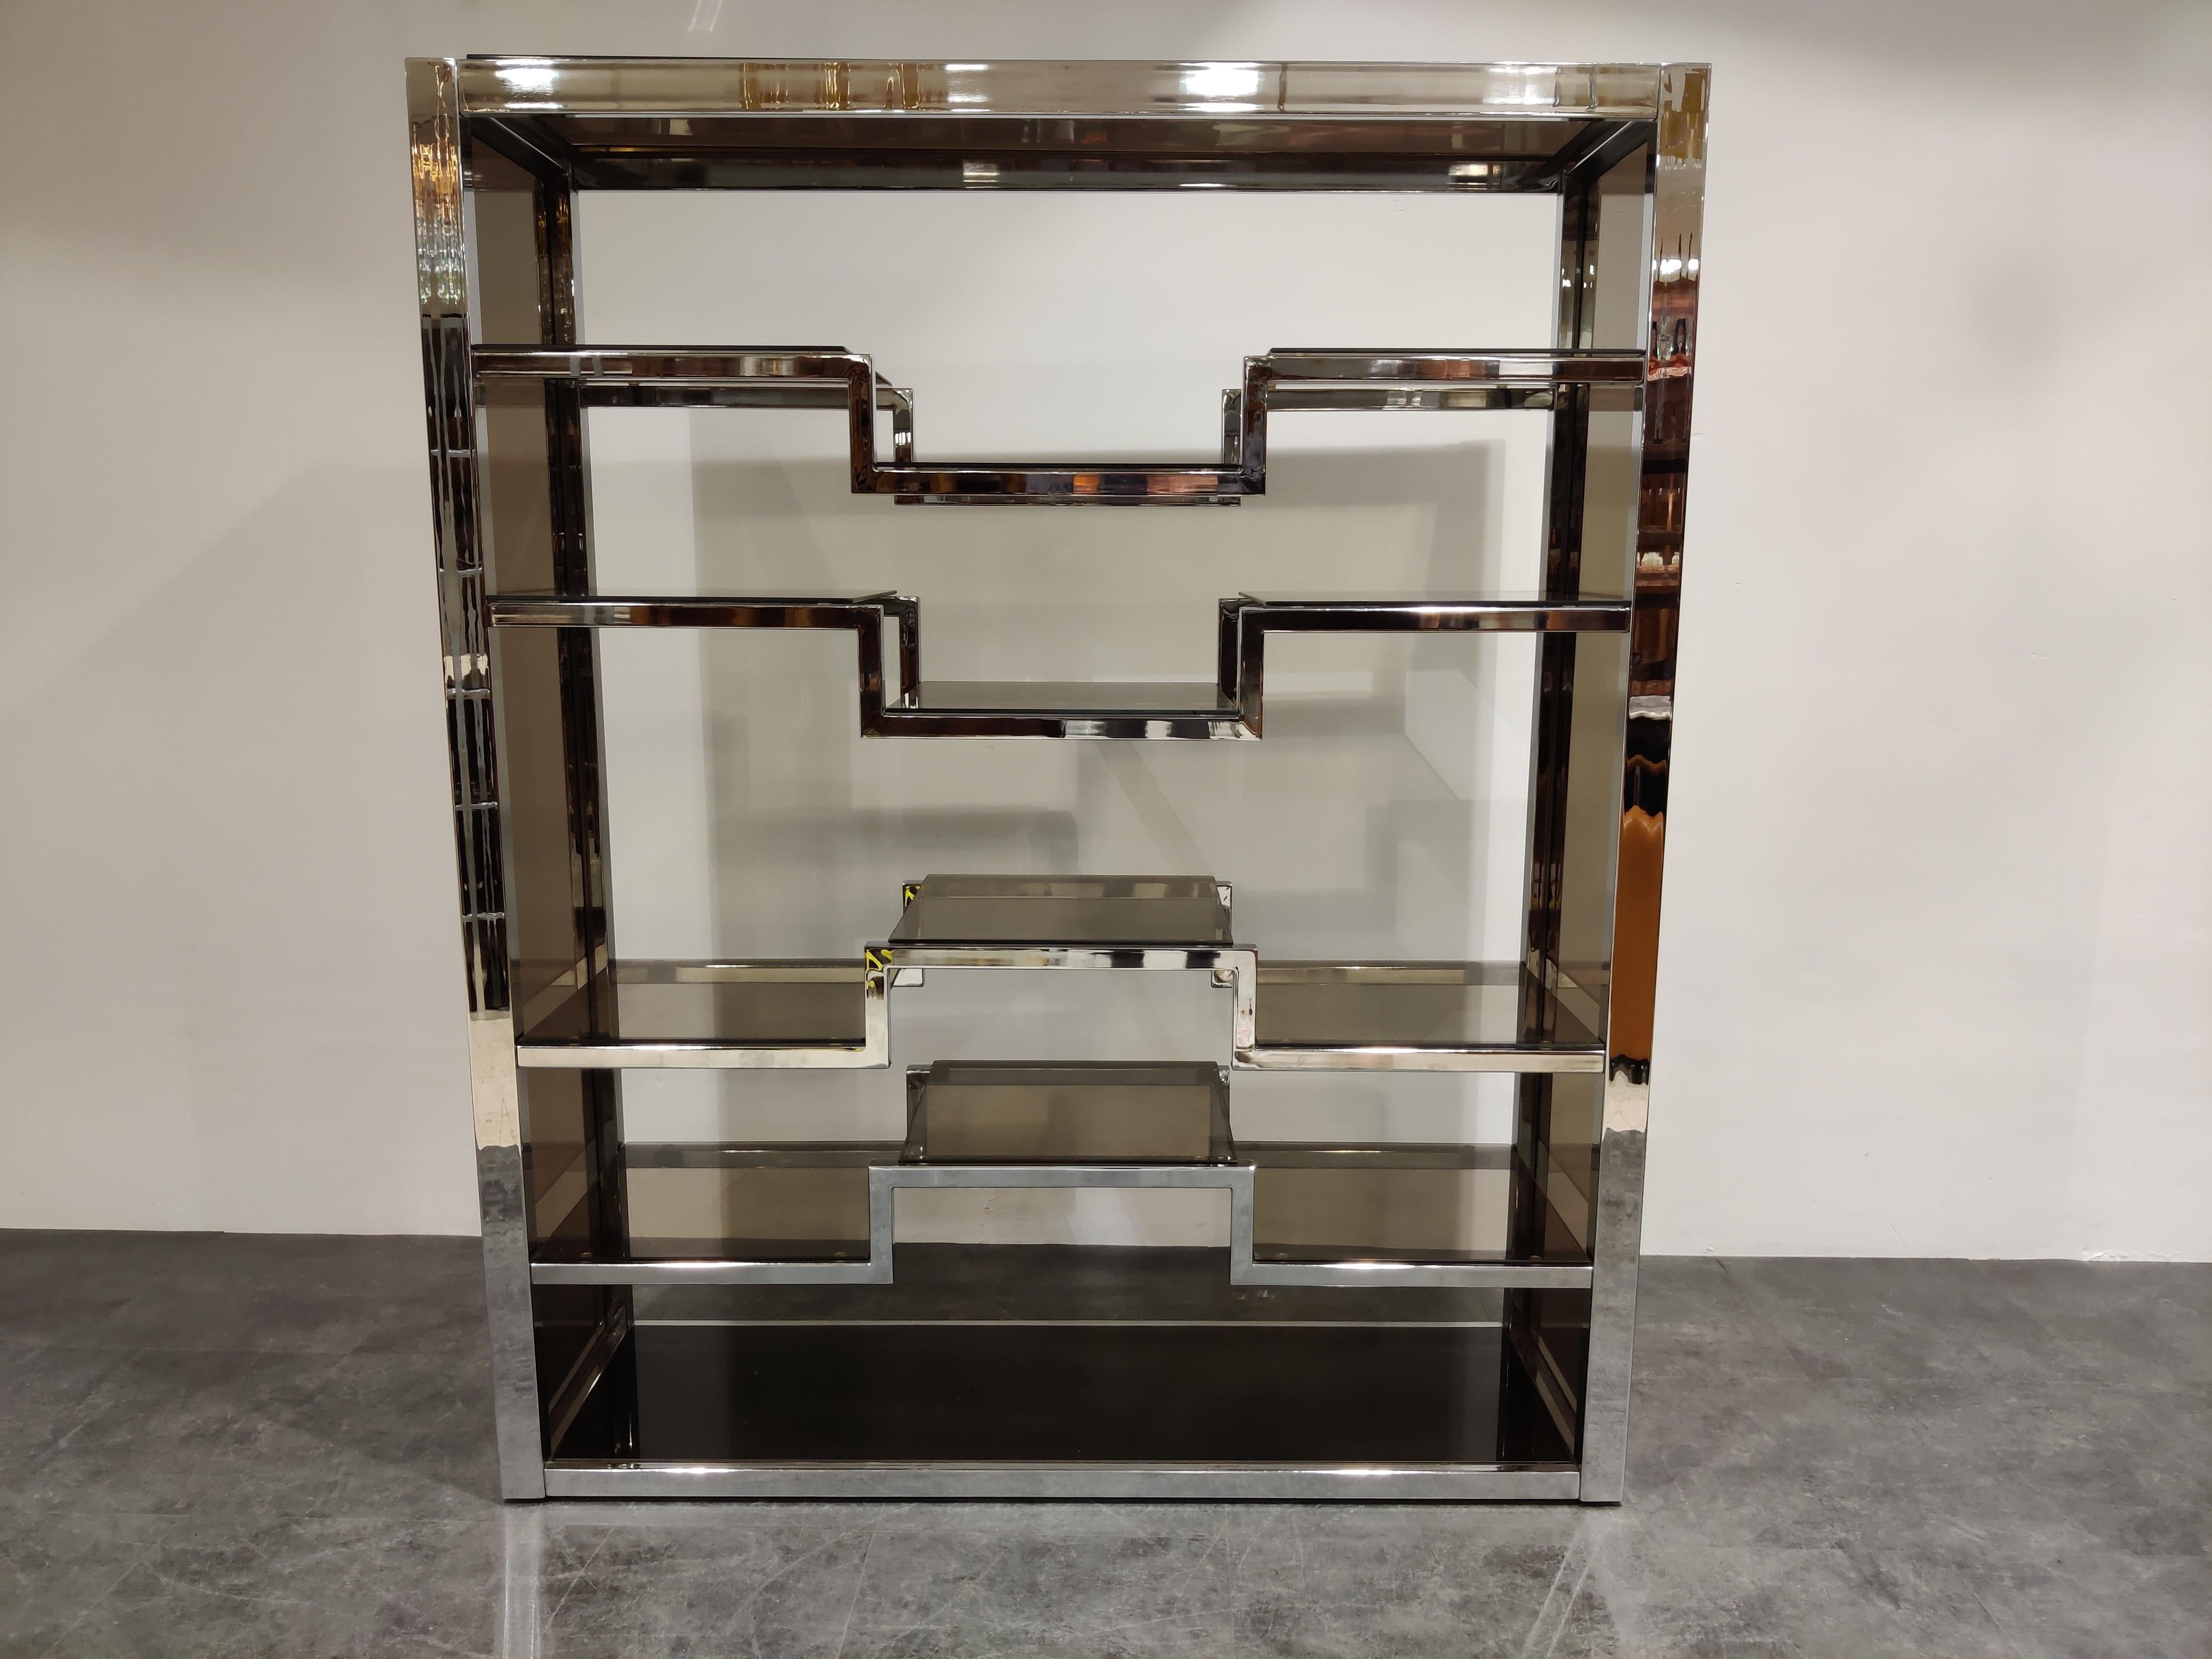 Hollywood regency wall unit or room divider with smoked glass in the style or Romeo Rega or Willy Rizzo

Bought in the 1970s from Roche Bobois

Good condition.

Glass side panels

Beautiful piece to display collections of all